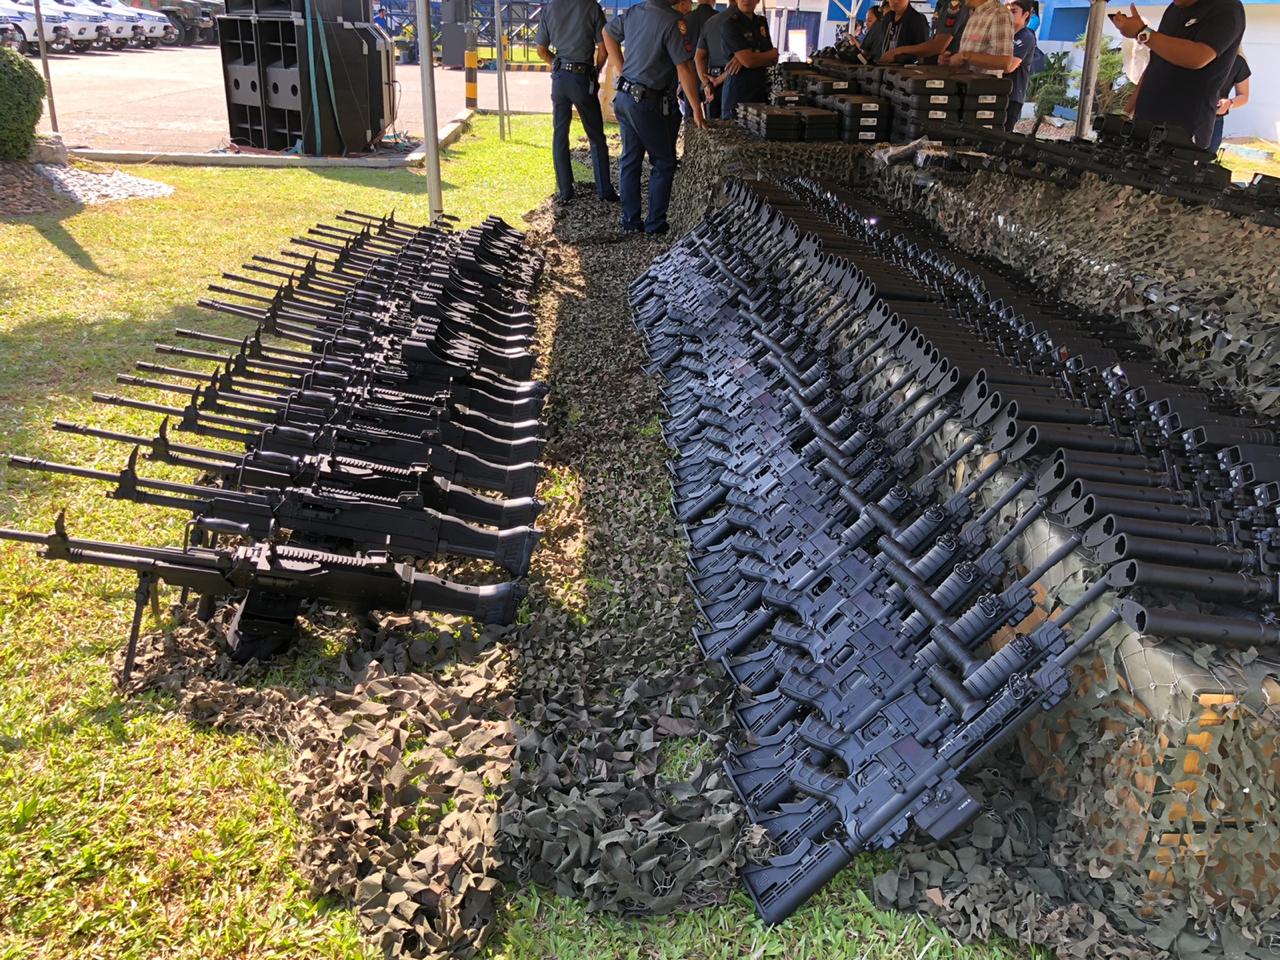 Police equipment, including choppers, troop carriers, bomb equipment, and firearms were presented and blessed at Camp Crame 12